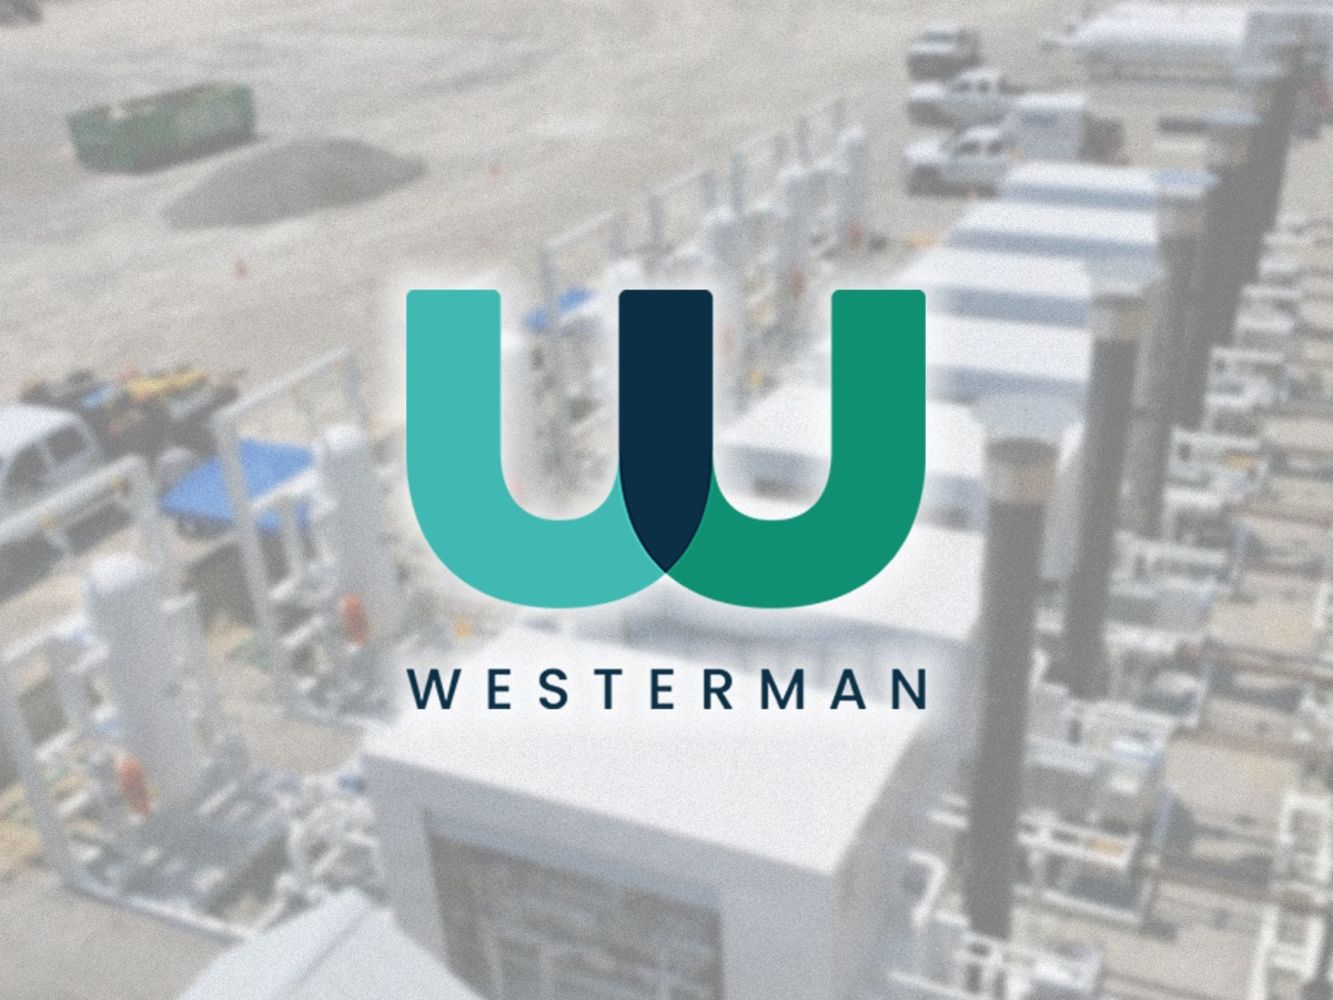 Oil & Gas field parts inventory plus manufacturing equipment surplus to the ongoing operations of Westerman - Bremen OH plant only